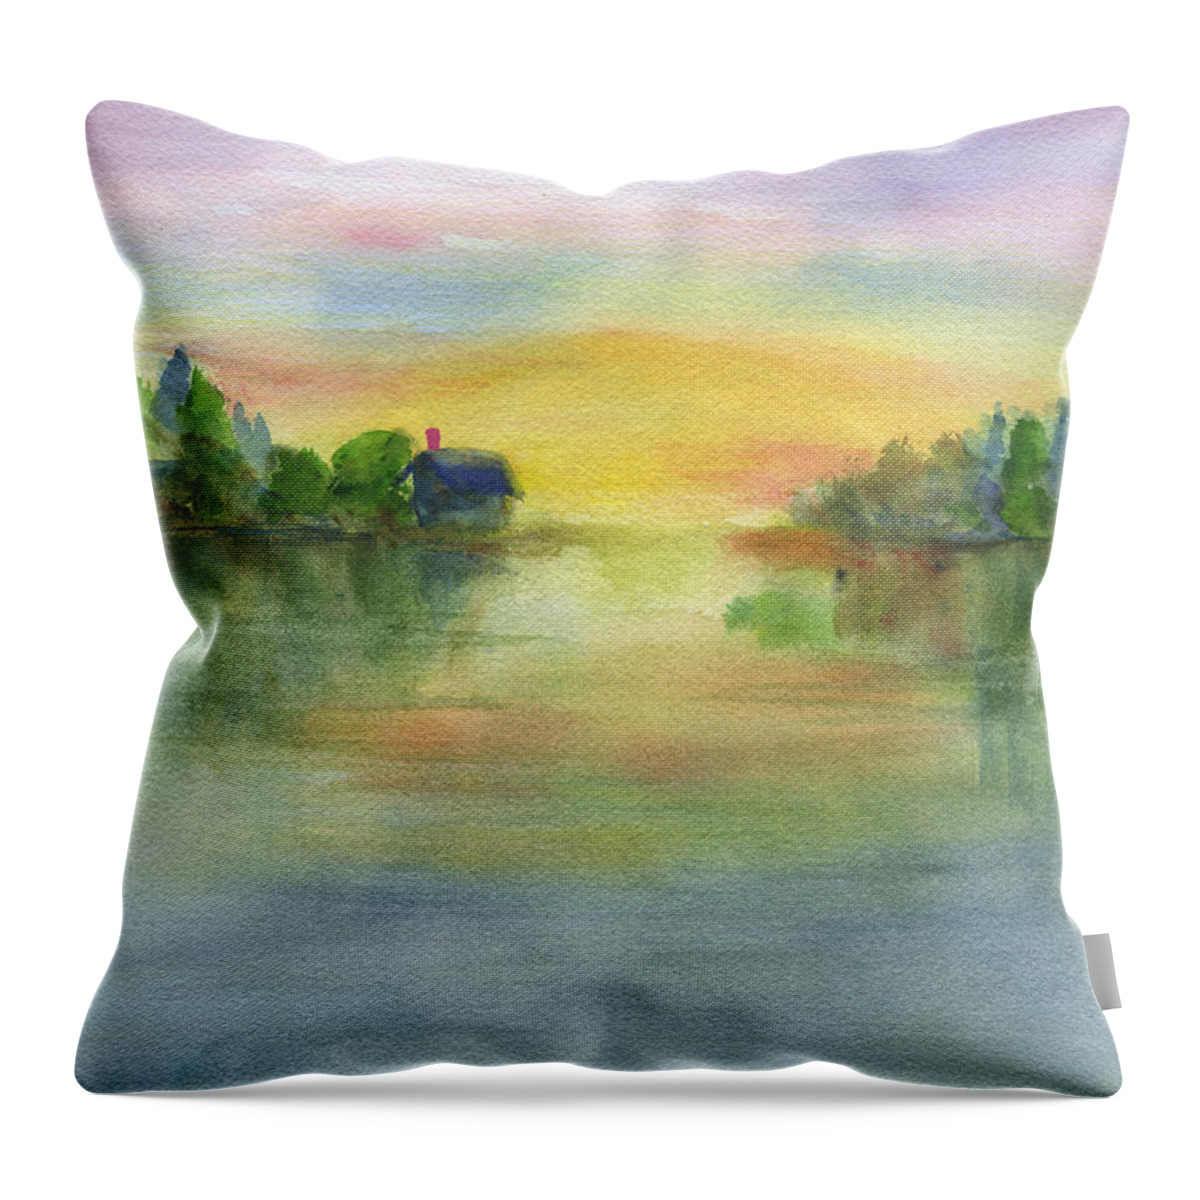 Lake Sunset 2 Throw Pillow featuring the painting Lake Sunset 2 by Frank Bright